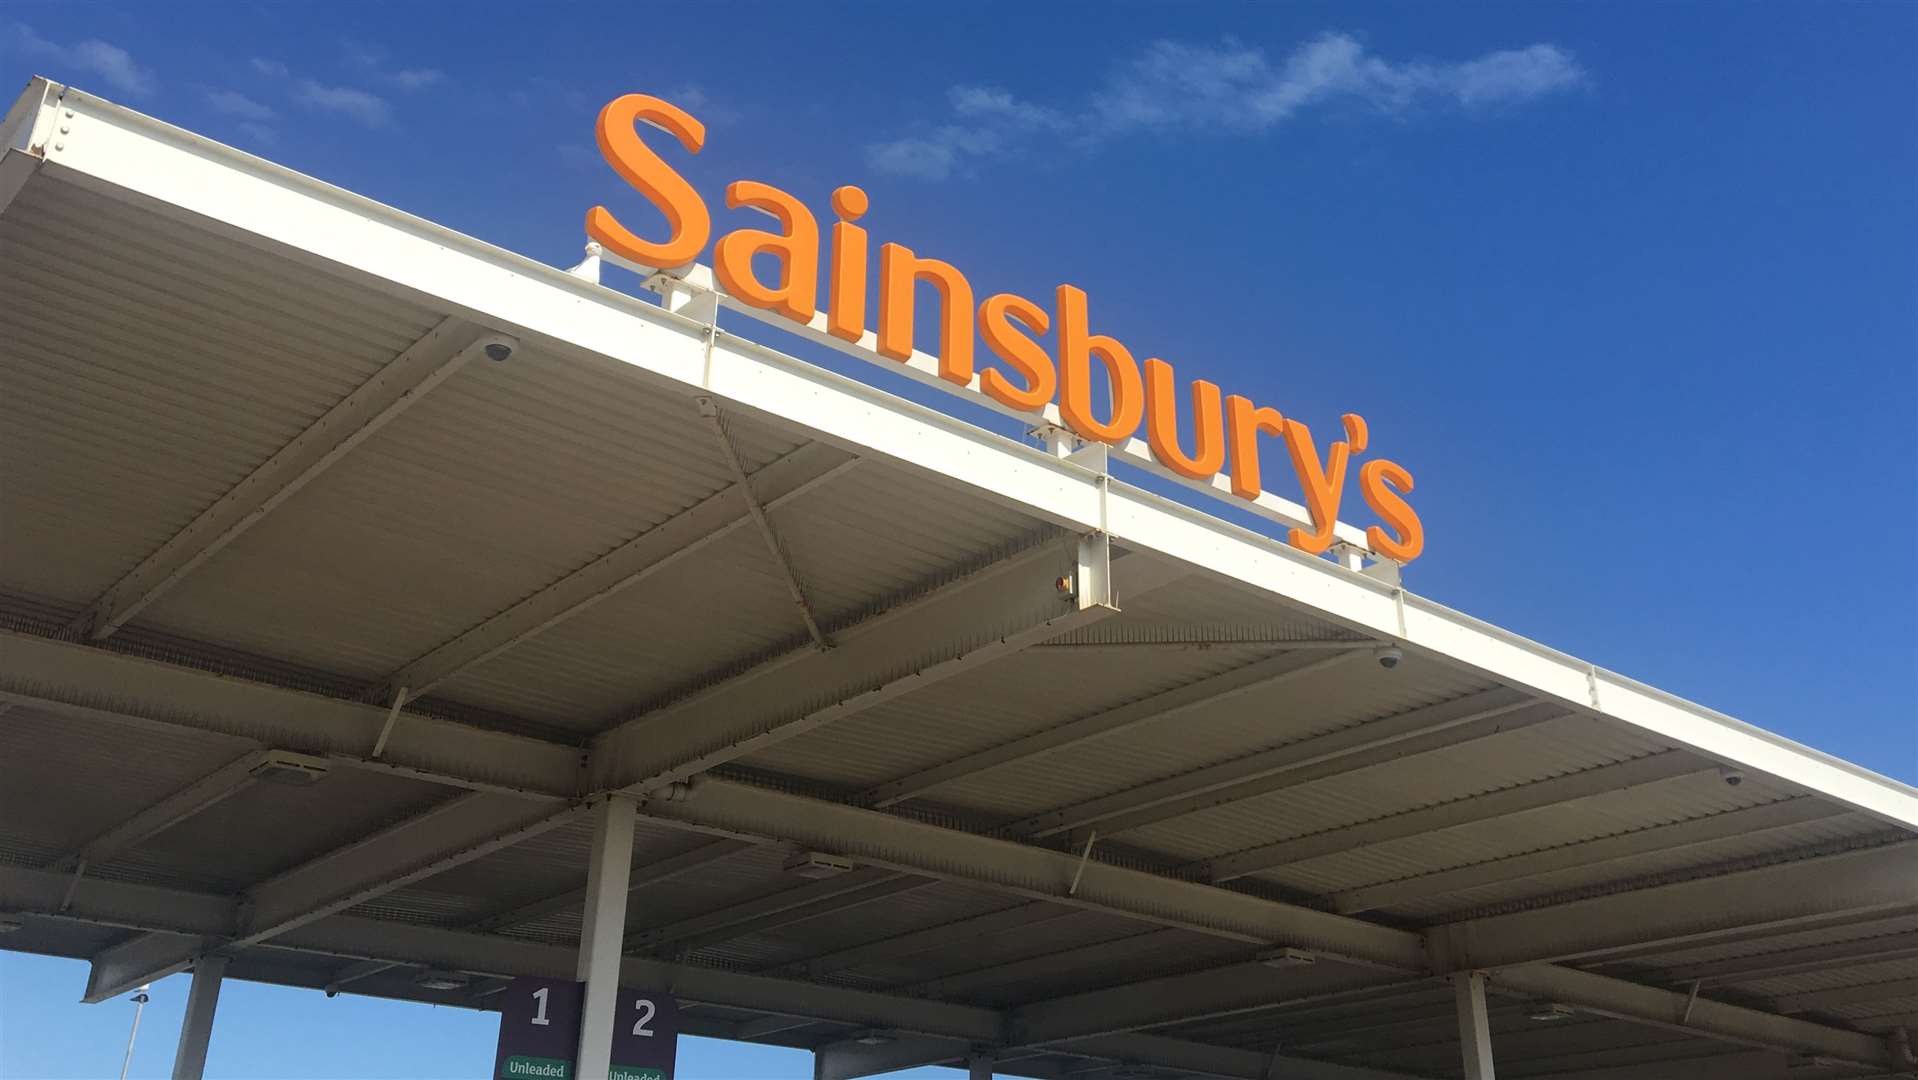 Sainsbury's faces a pay row which could hit deliveries to its stores